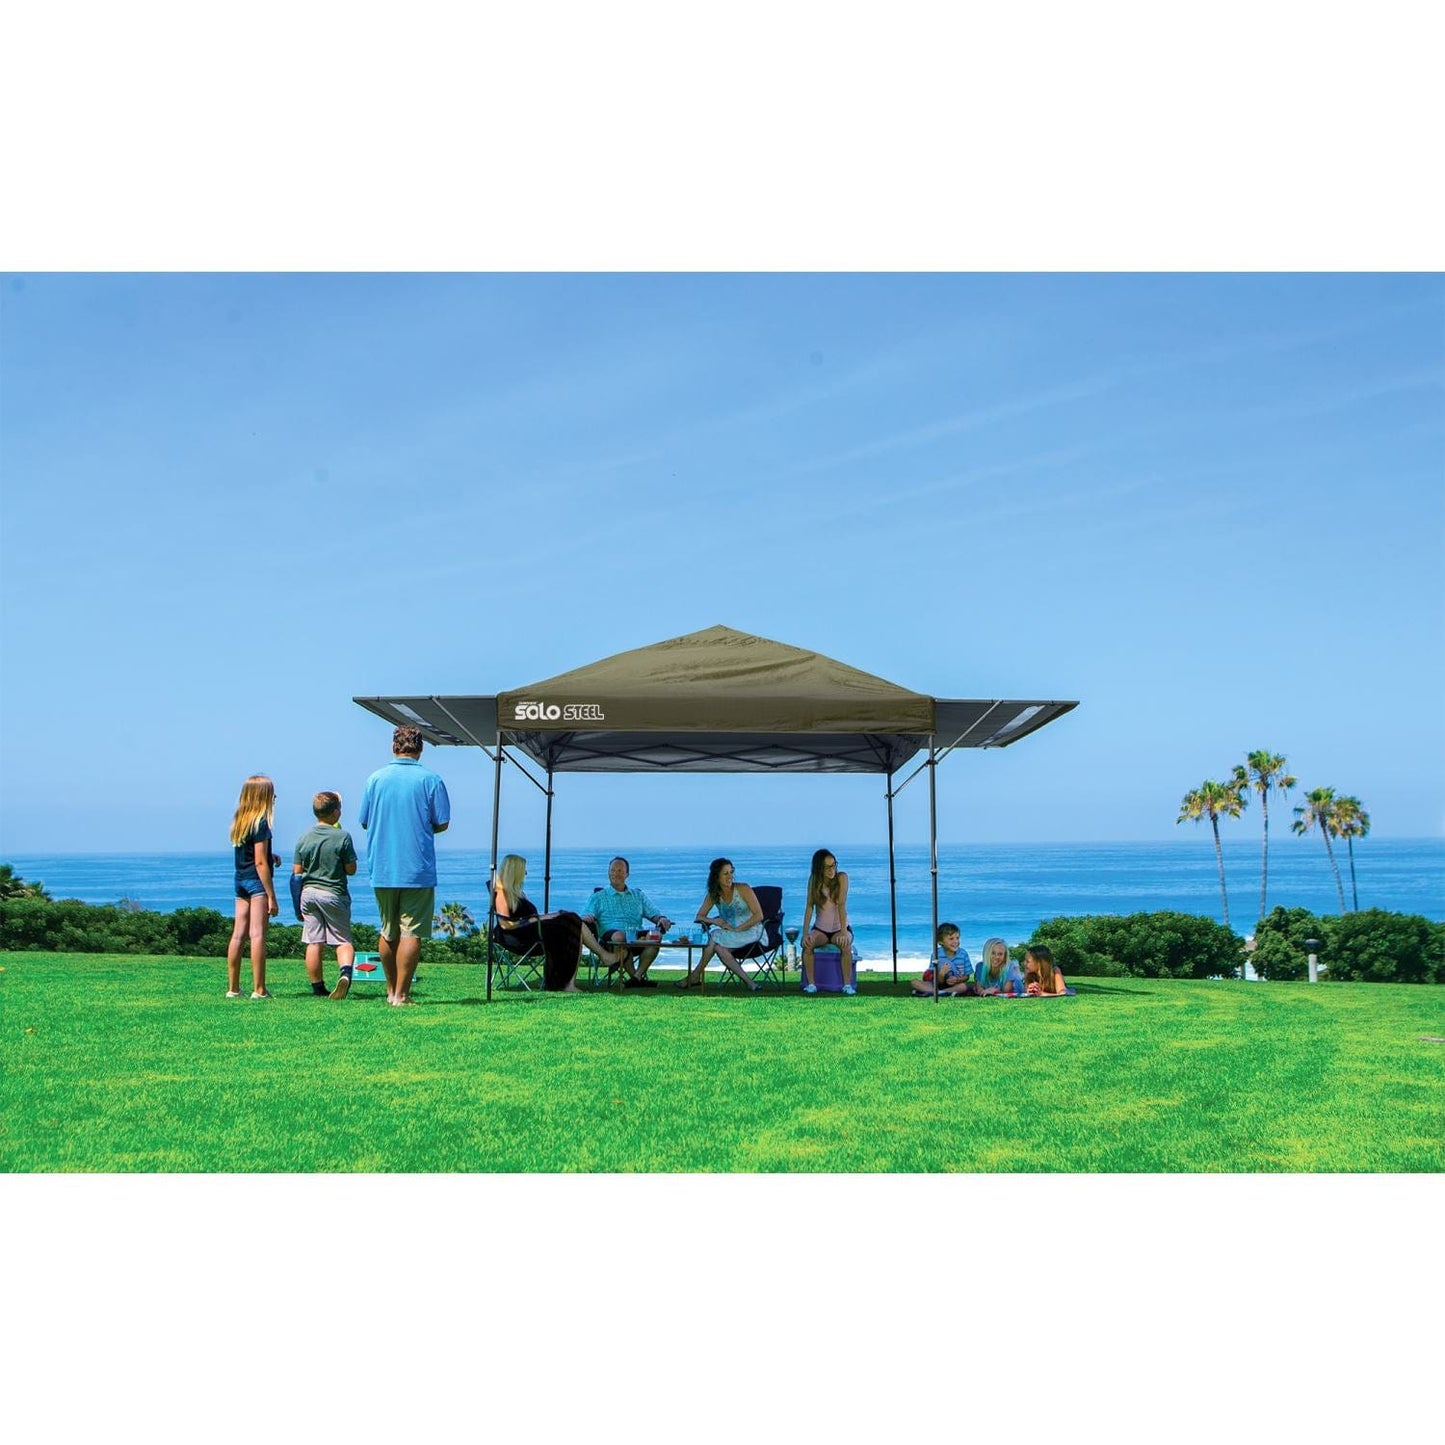 Quik Shade Pop Up Canopies Quik Shade | Solo Steel 170 10' x 17' Straight Leg Canopy - Olive 167550DS